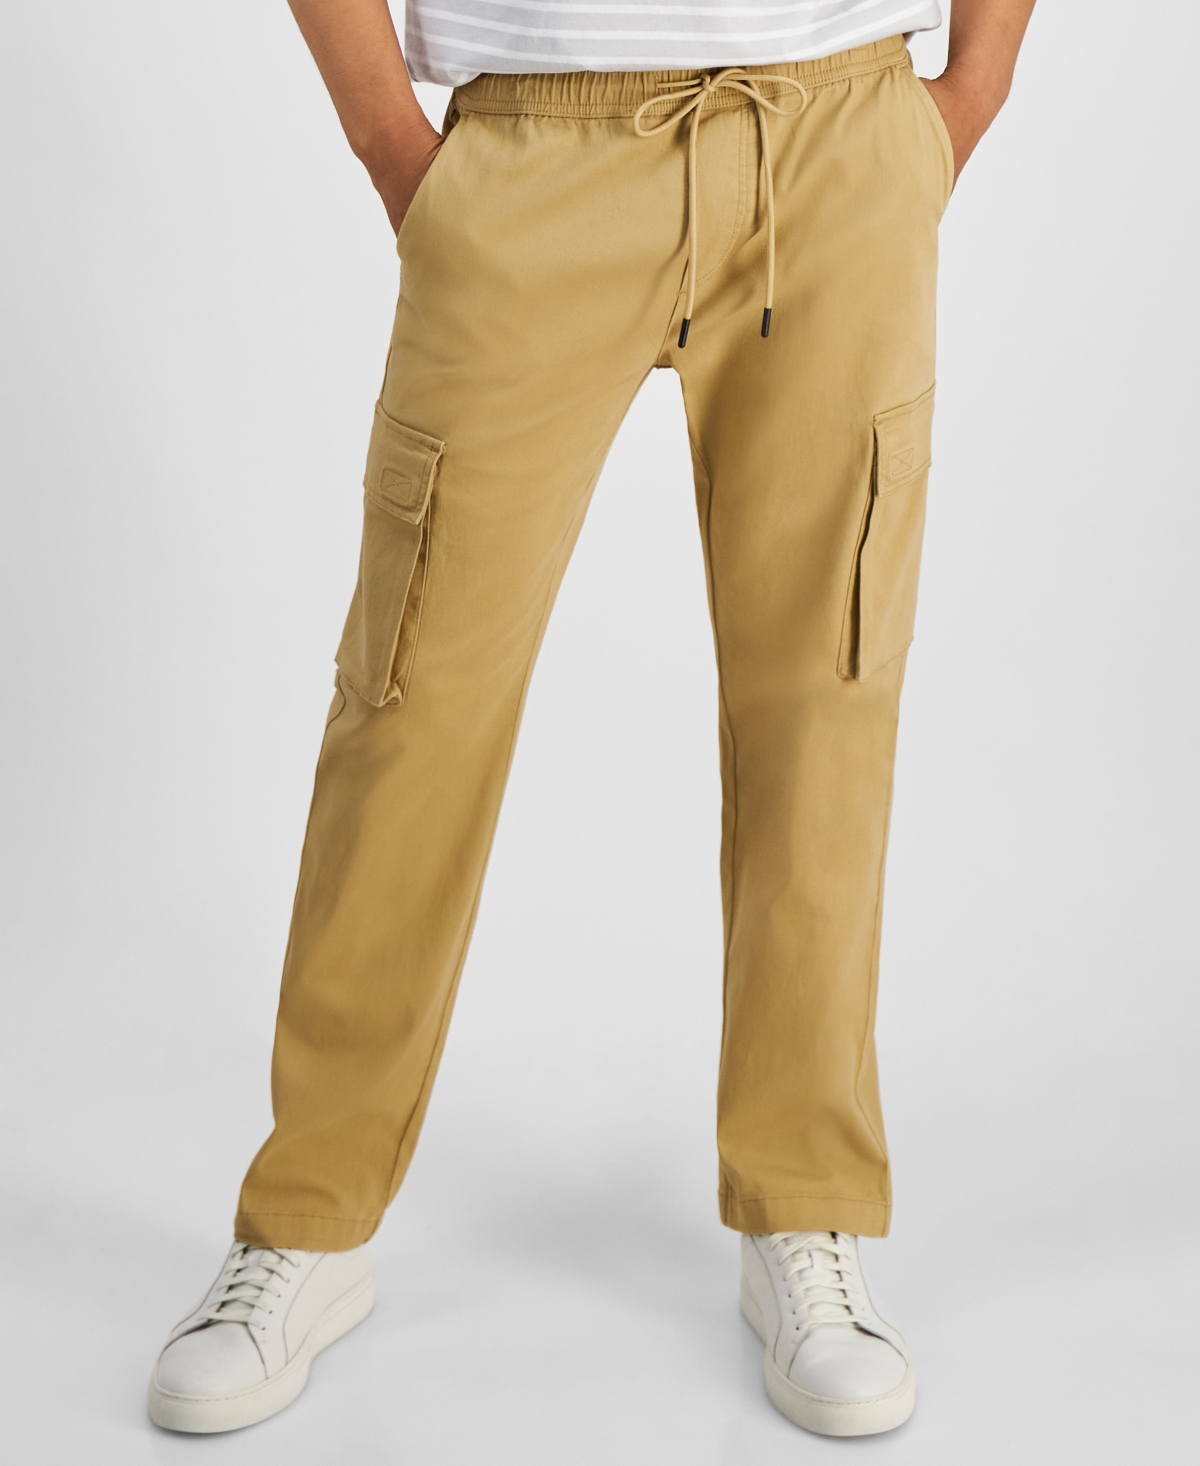 AND NOW THIS MEN'S REGULAR-FIT TWILL DRAWSTRING CARGO PANTS, CREATED FOR MACY'S